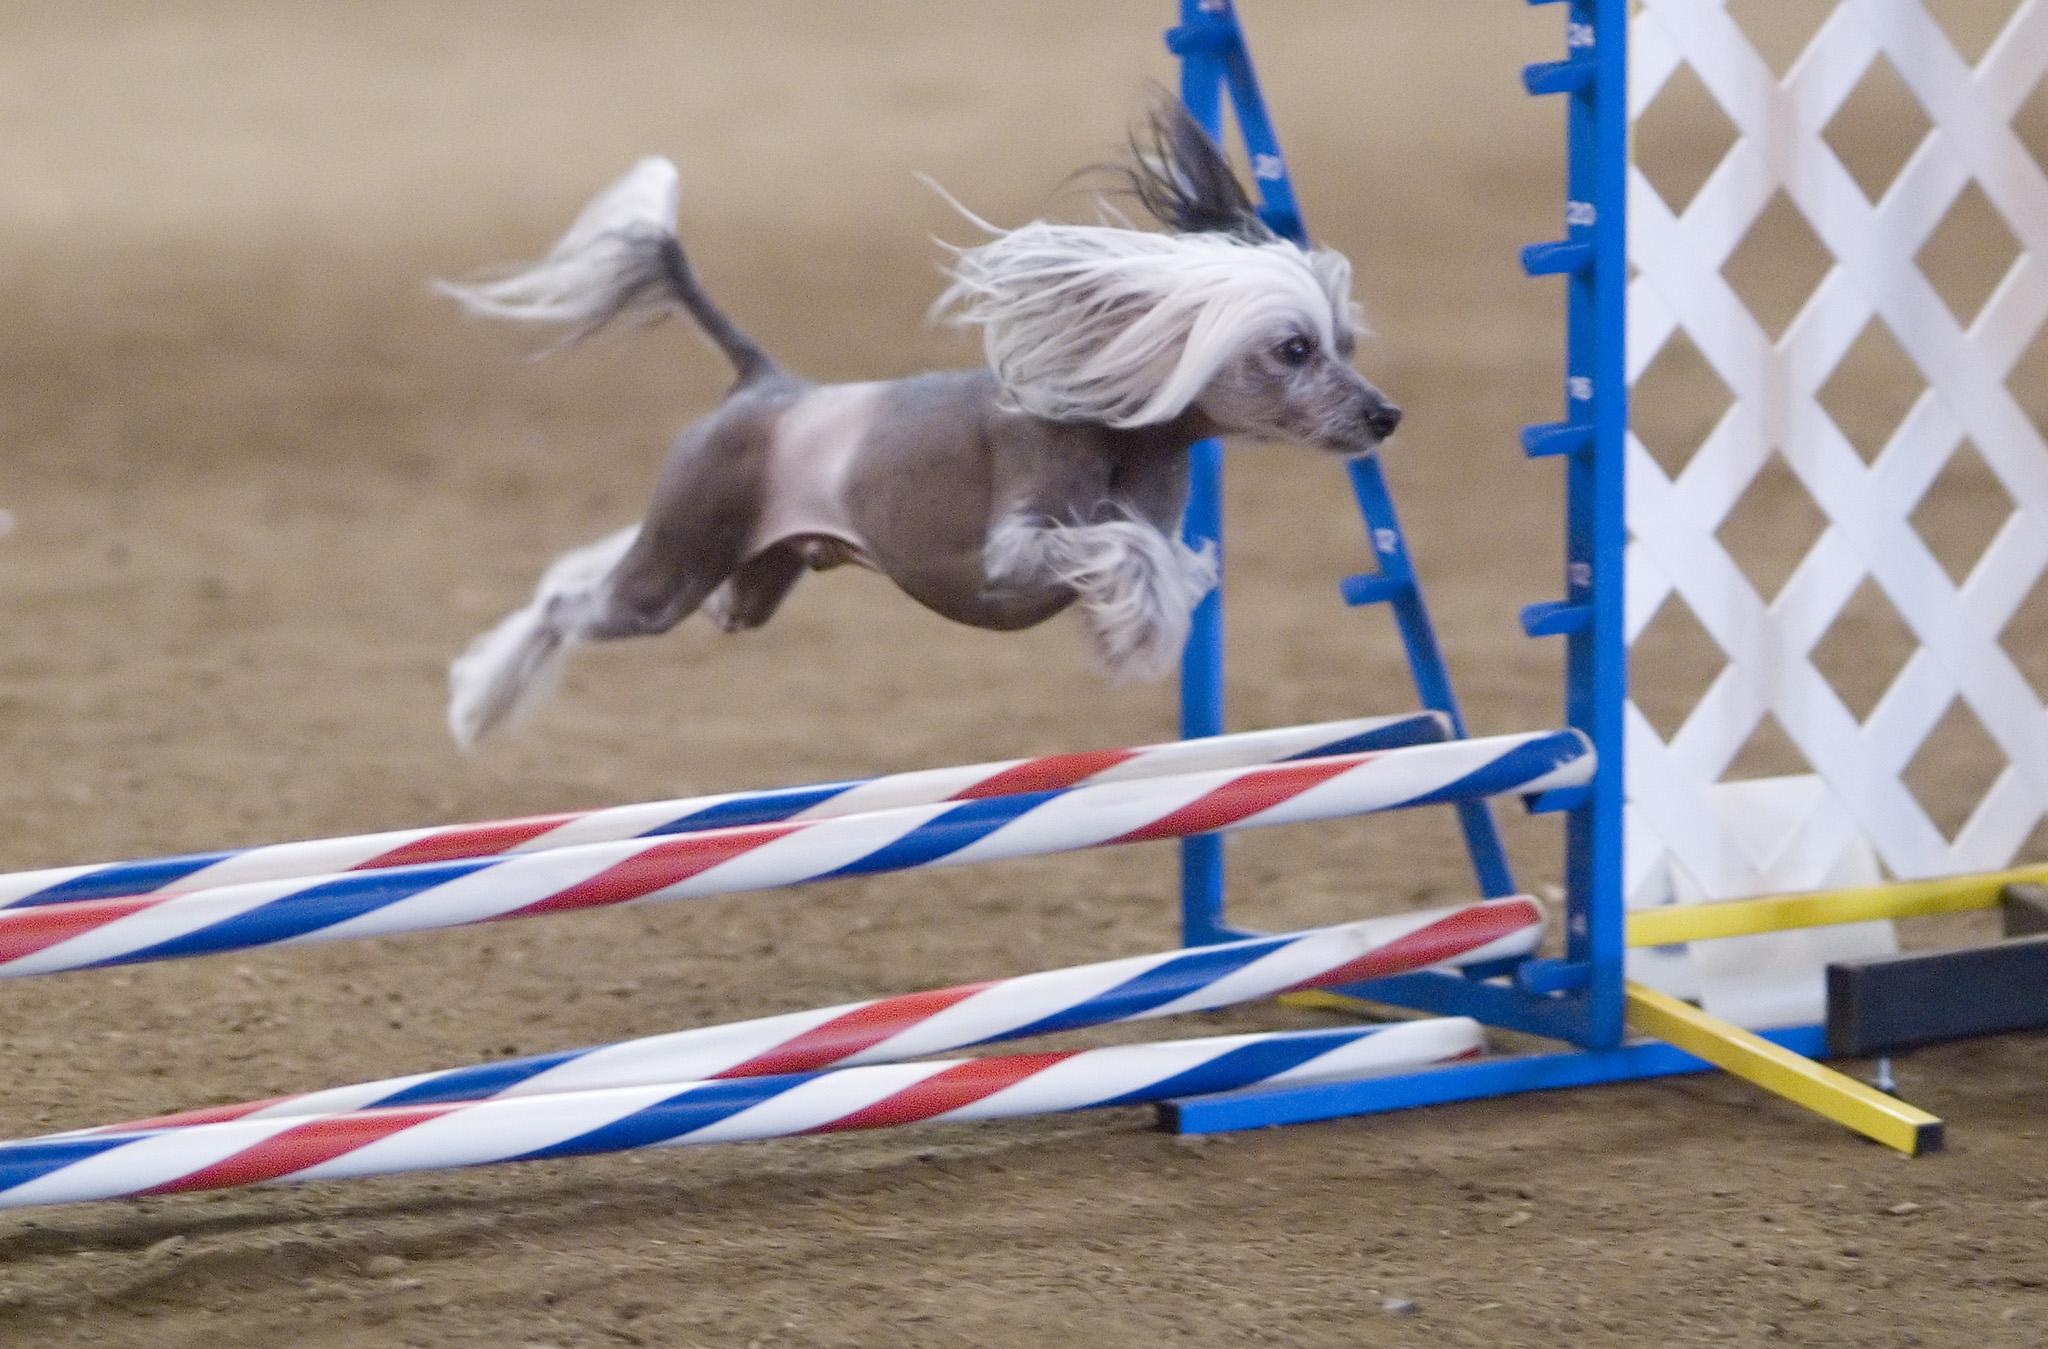 Jumping Chinese Crested dog photo and wallpaper Beautiful Jumping